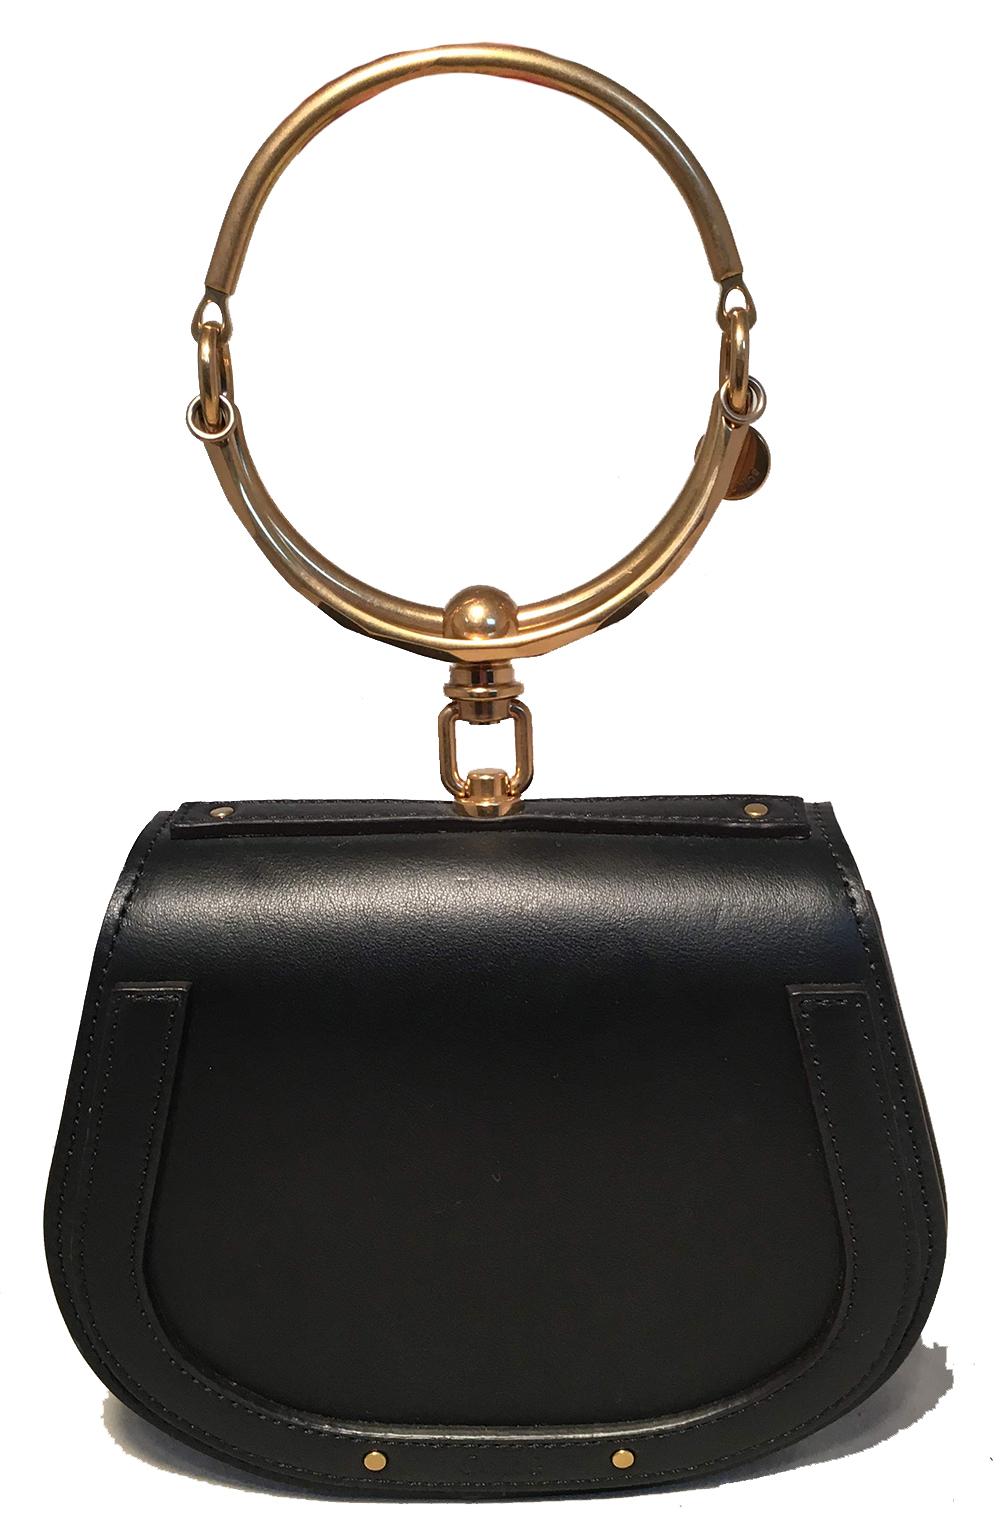 NWOT Chloe Nile Small Black Leather Bracelet Bag in unused condition. Black smooth leather exterior trimmed with matte gold hardware. Unique hoop bracelet top handle. Back side slit pocket. Front flap snap closure opens to a suede interior that